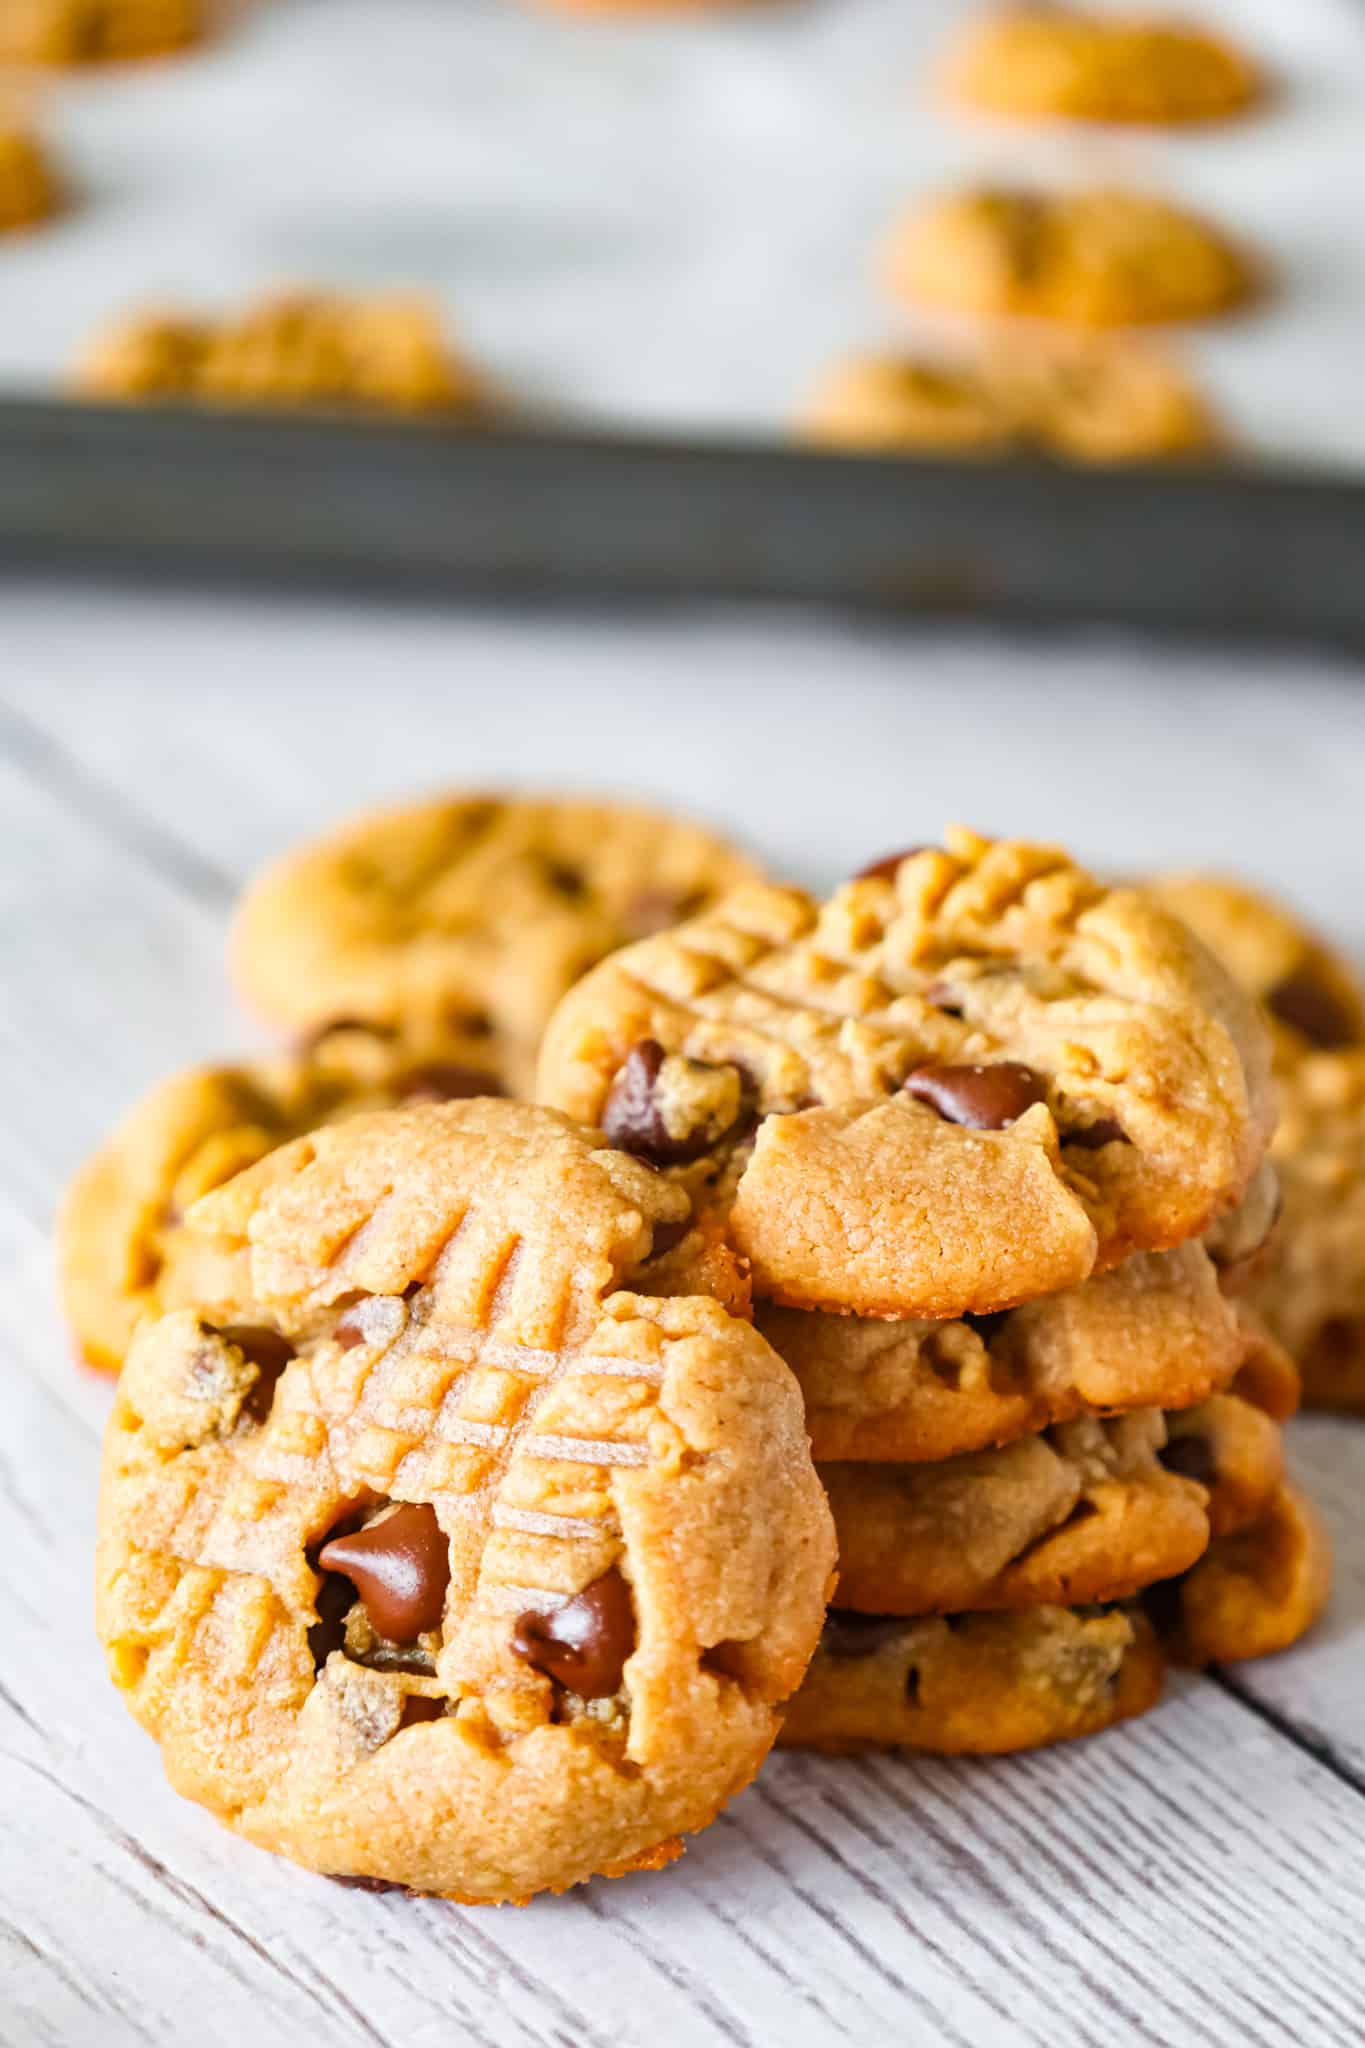 Peanut Butter Chocolate Chip Cookies are simple and delicious peanut butter cookies loaded with semi sweet chocolate chips.